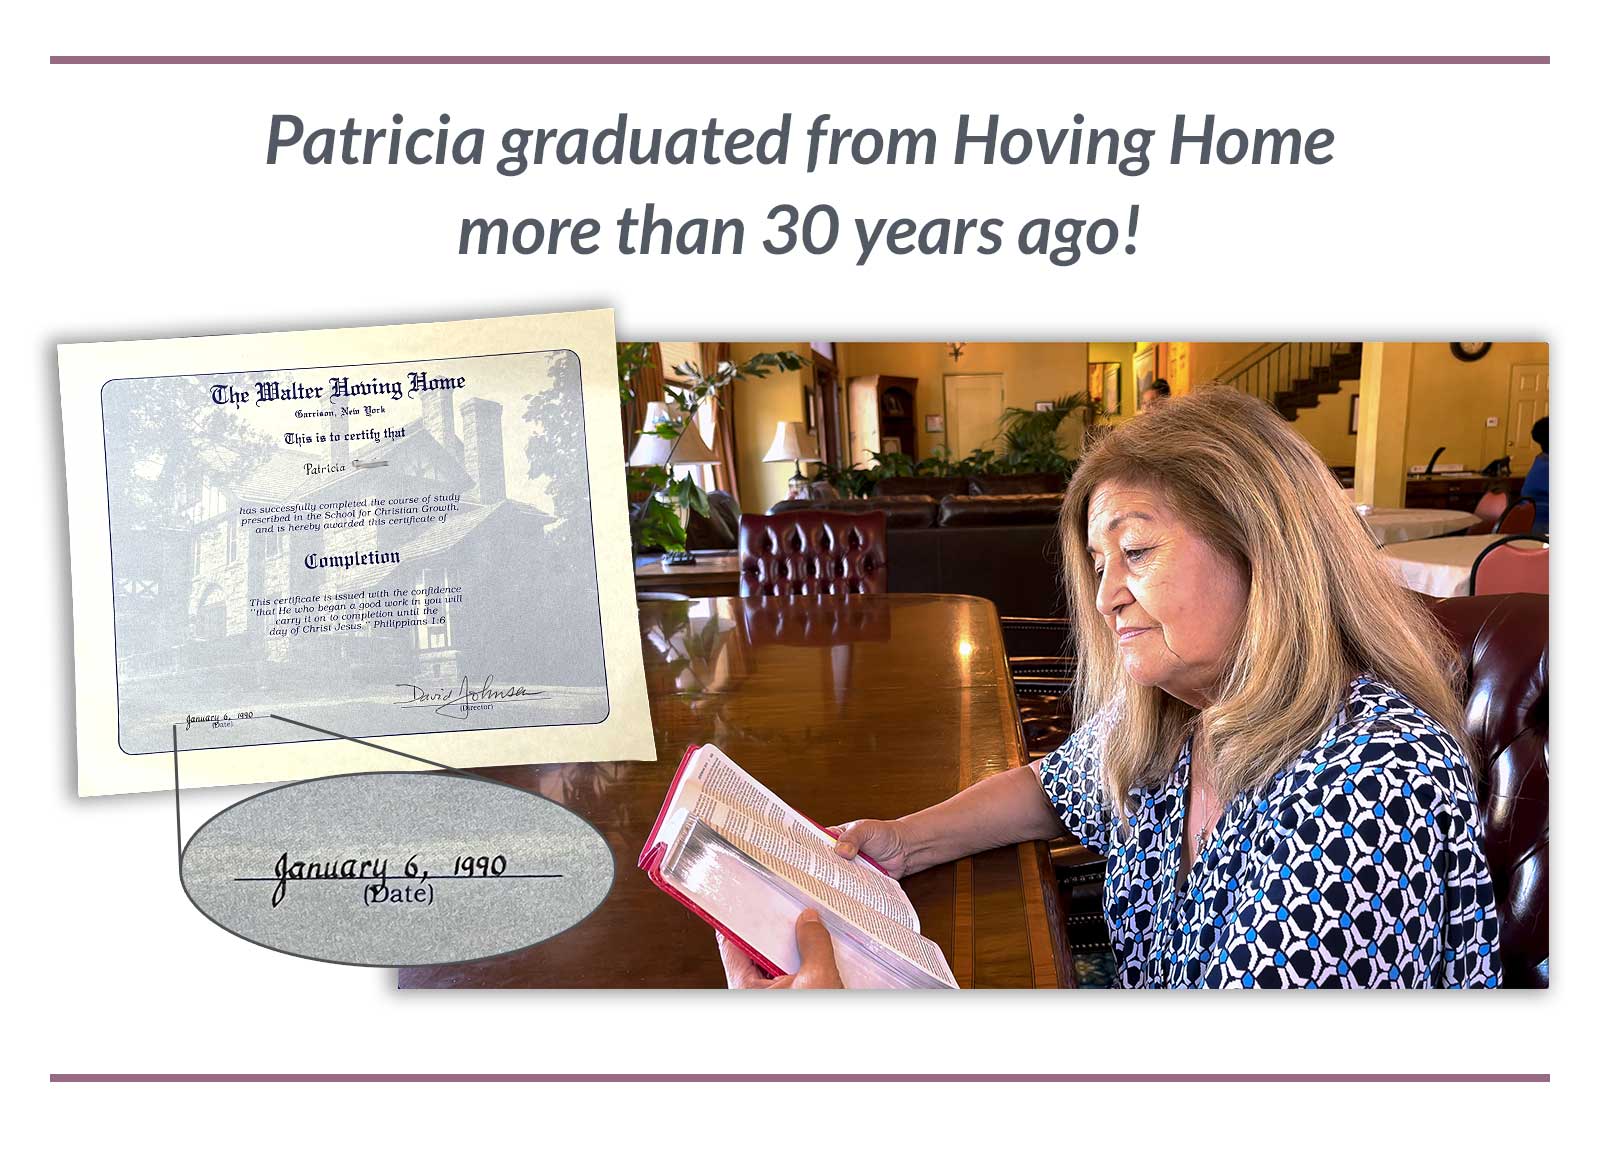 Patricia graduated from Hoving Home more than 30 years ago!